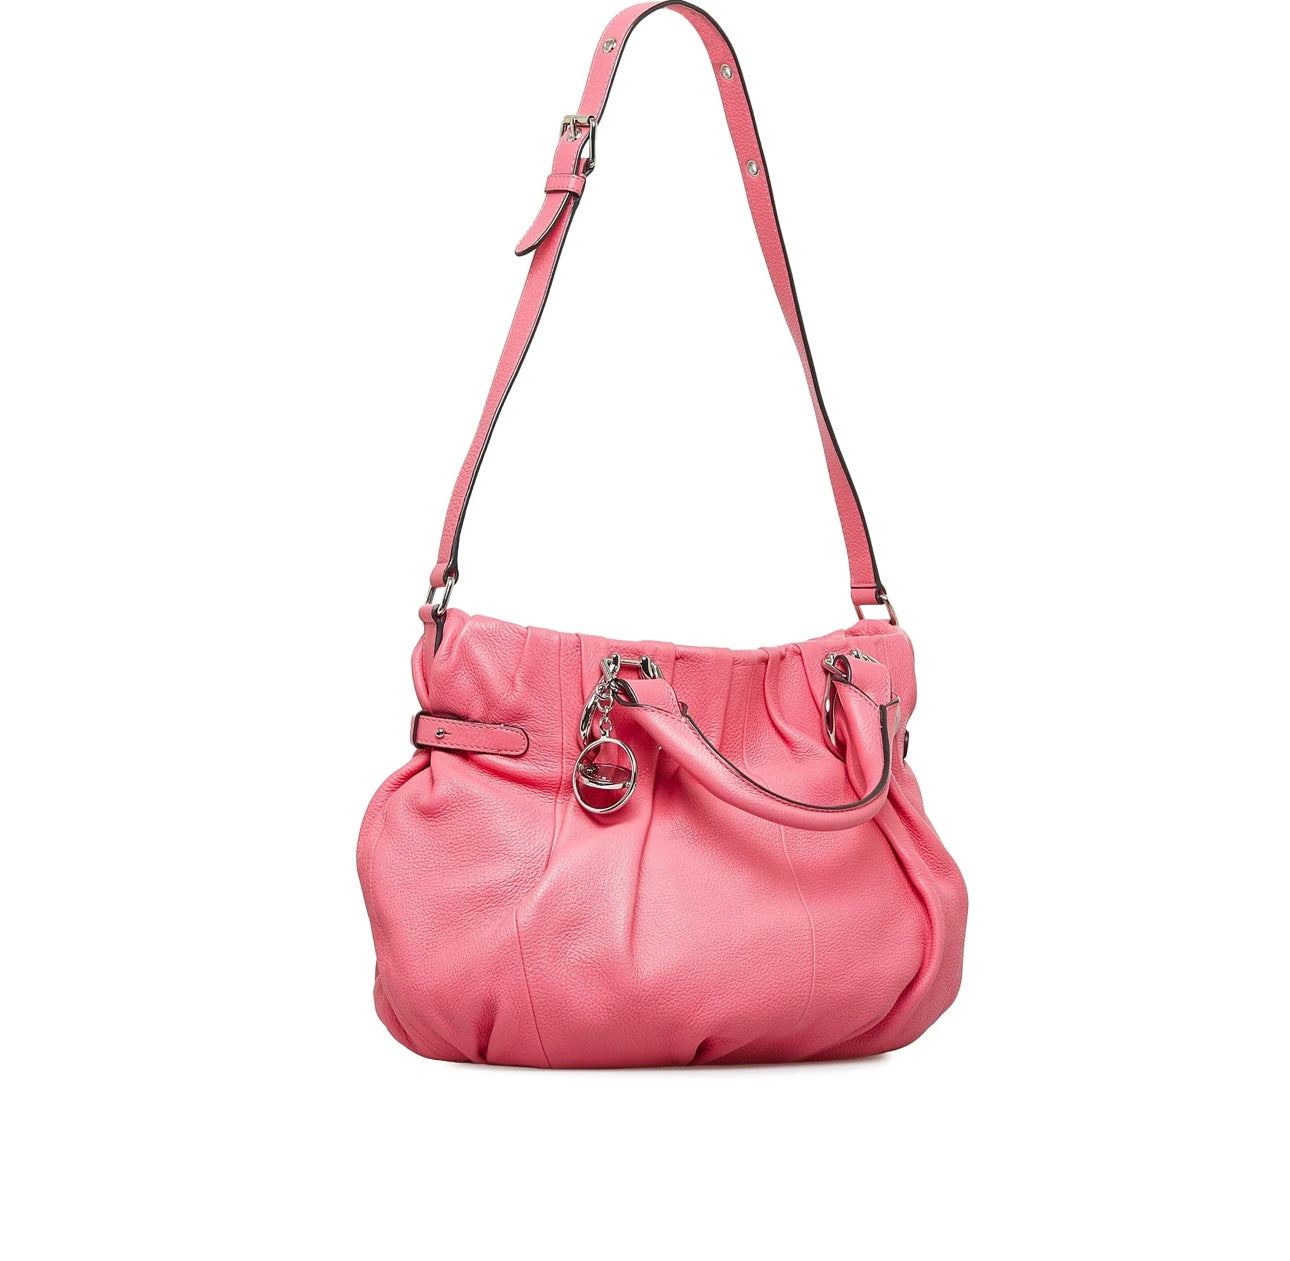 Pre-Owned Authentic Celine Leather Satchel-Pink